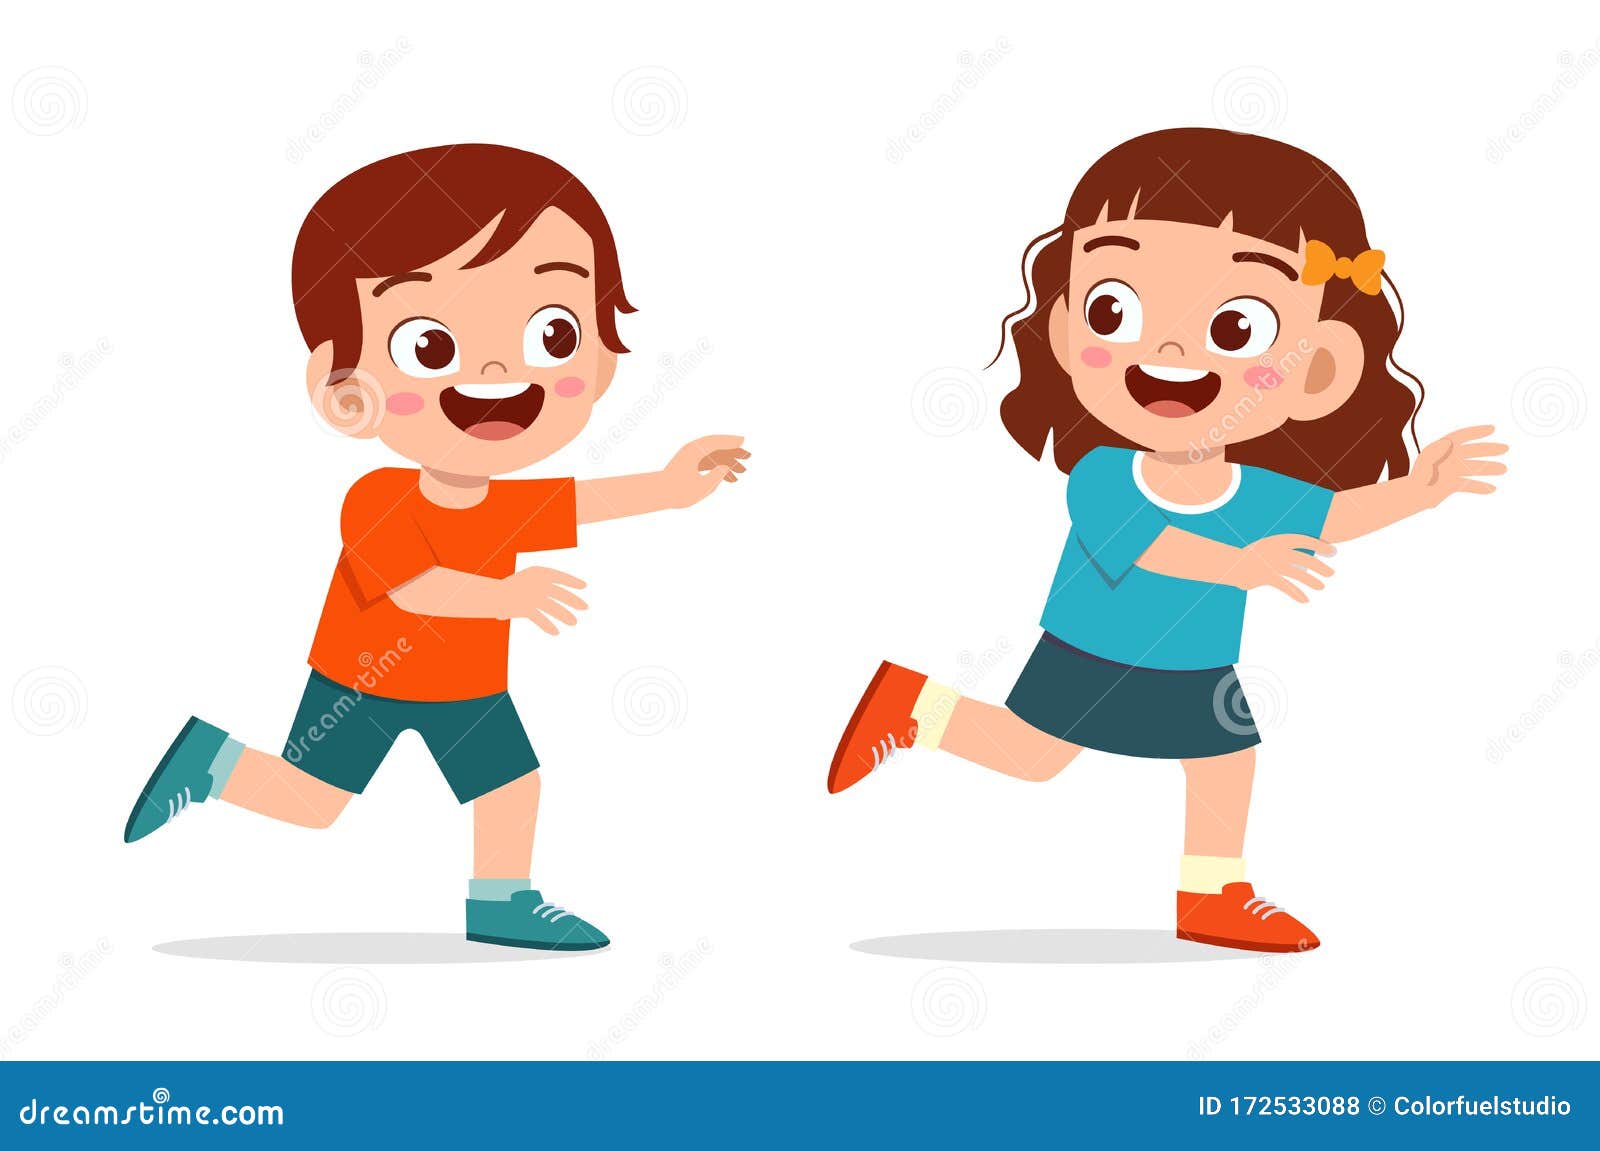 Child Playing Tag Stock Illustrations – 277 Child Playing Tag